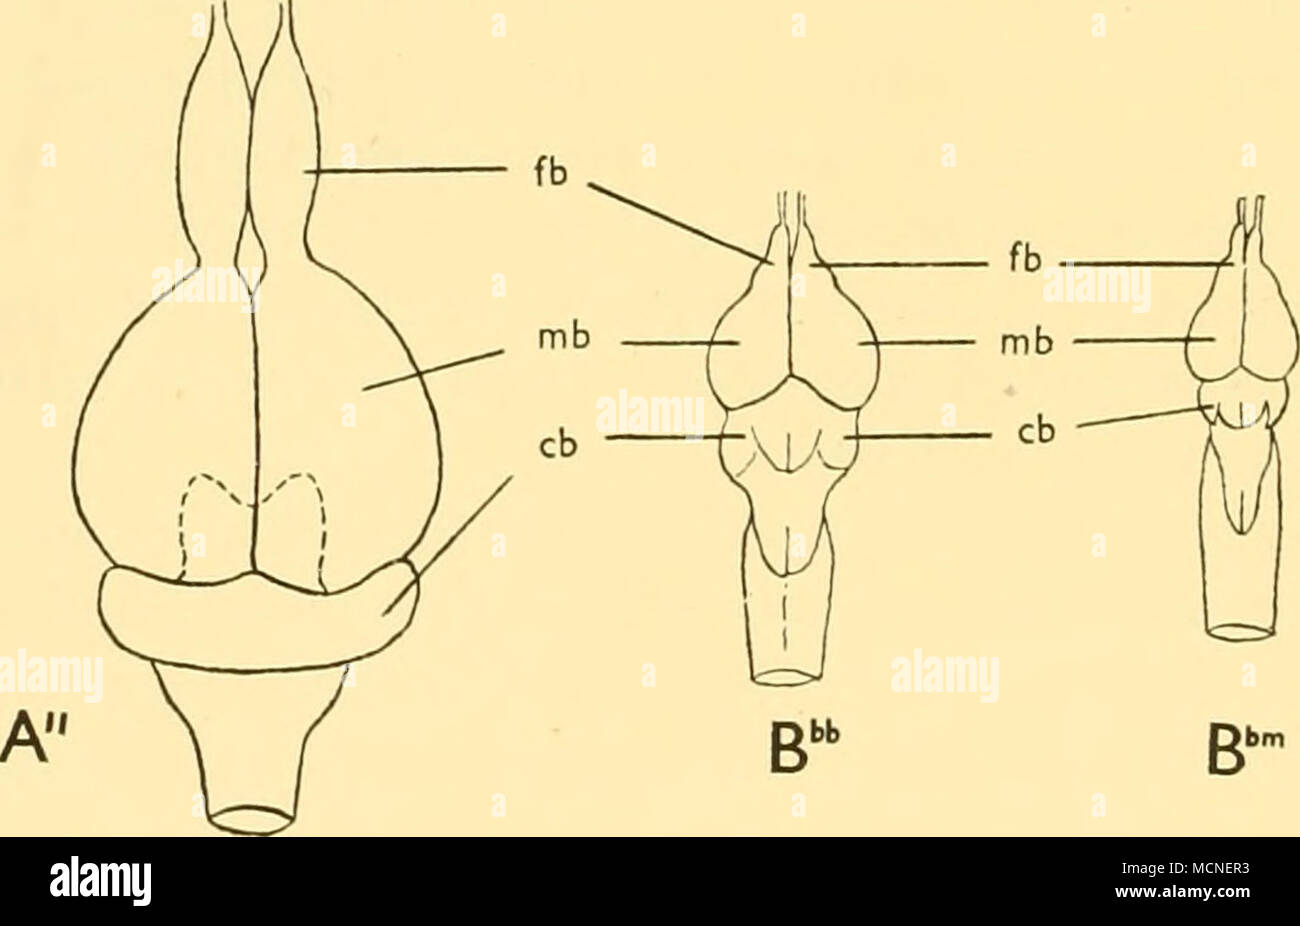 . Text-fig. 43. The development of the body muscles, gill filaments and brain of (a, a', a&quot;) Maurolicus muelleri; (Bb, Bbb) Cyclothone braueri, and (b, Bm, Bbm) C. microdon. In A and B, which are transverse sections through the body just in front of the caudal peduncle, the muscle fibres are shown in black and are drawn to scale. The drawings of the gill filaments are from the lower part of the first gill arch, fb, forebrain; mb, midbrain; cb, cerebellum, (a, b, x 15; a', Bm, Bb, X20; a&quot;, Bbb, Bbm, x 9.) Stock Photo